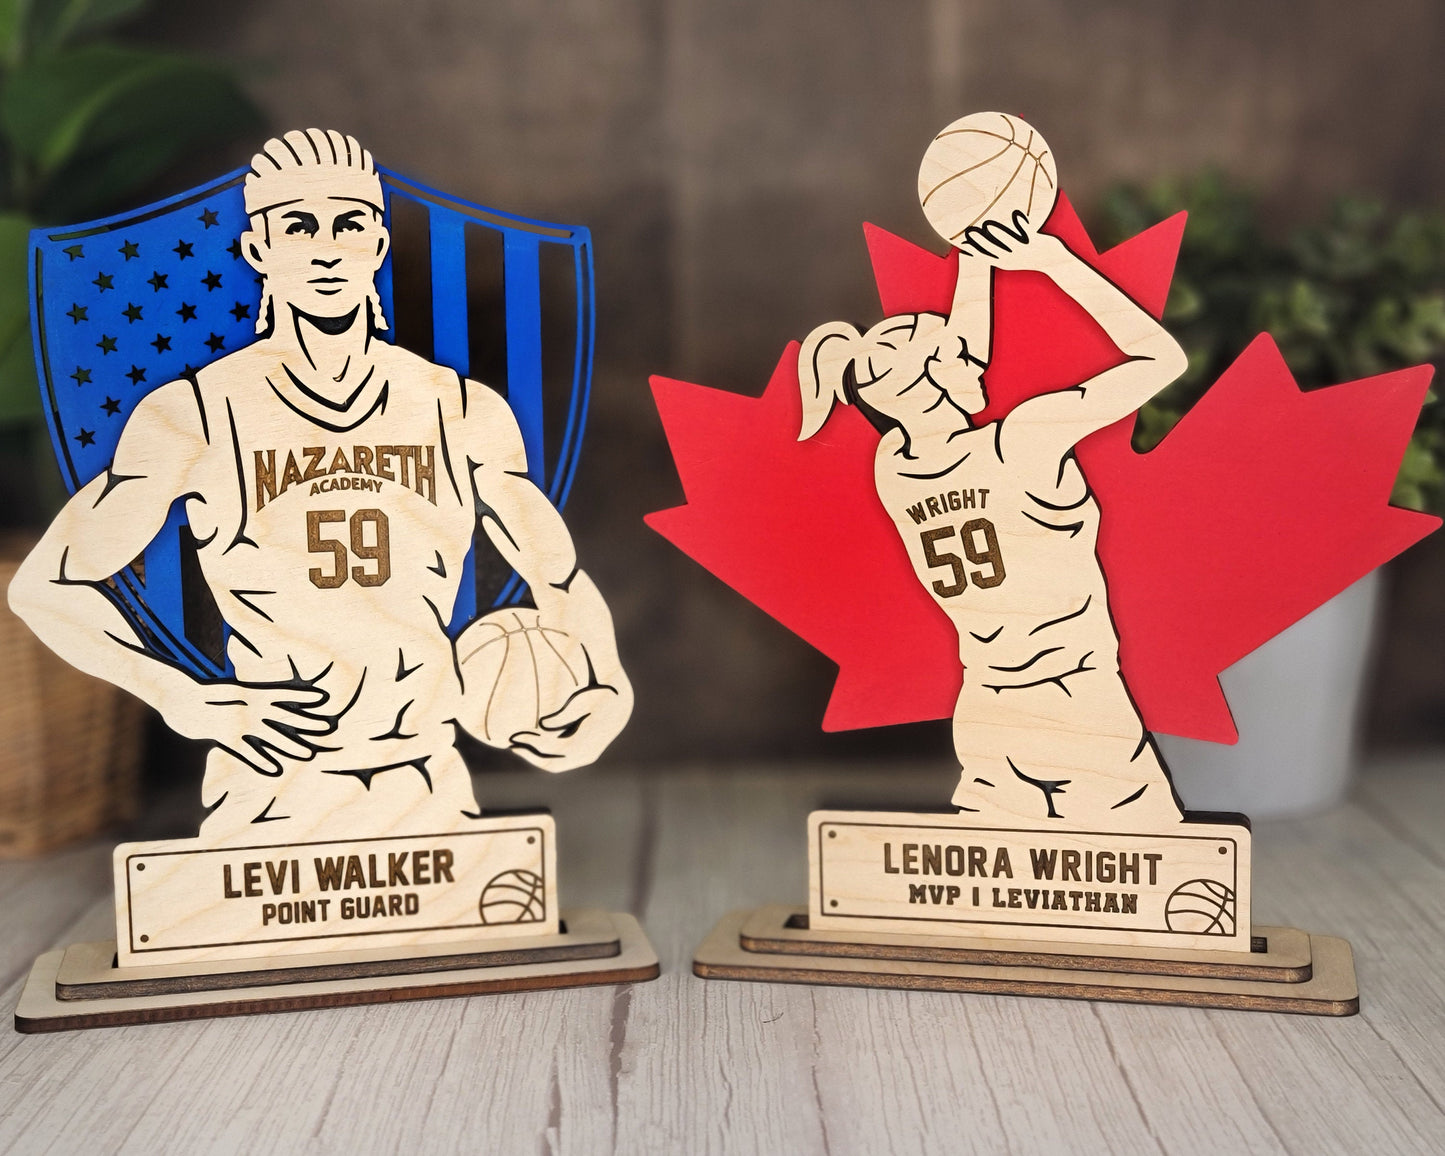 Stadium Series Stand Ups - Basketball - 5 poses in 2 cut formats and 1 engrave option with Male and Female - Tested on Glowforge & Lightburn